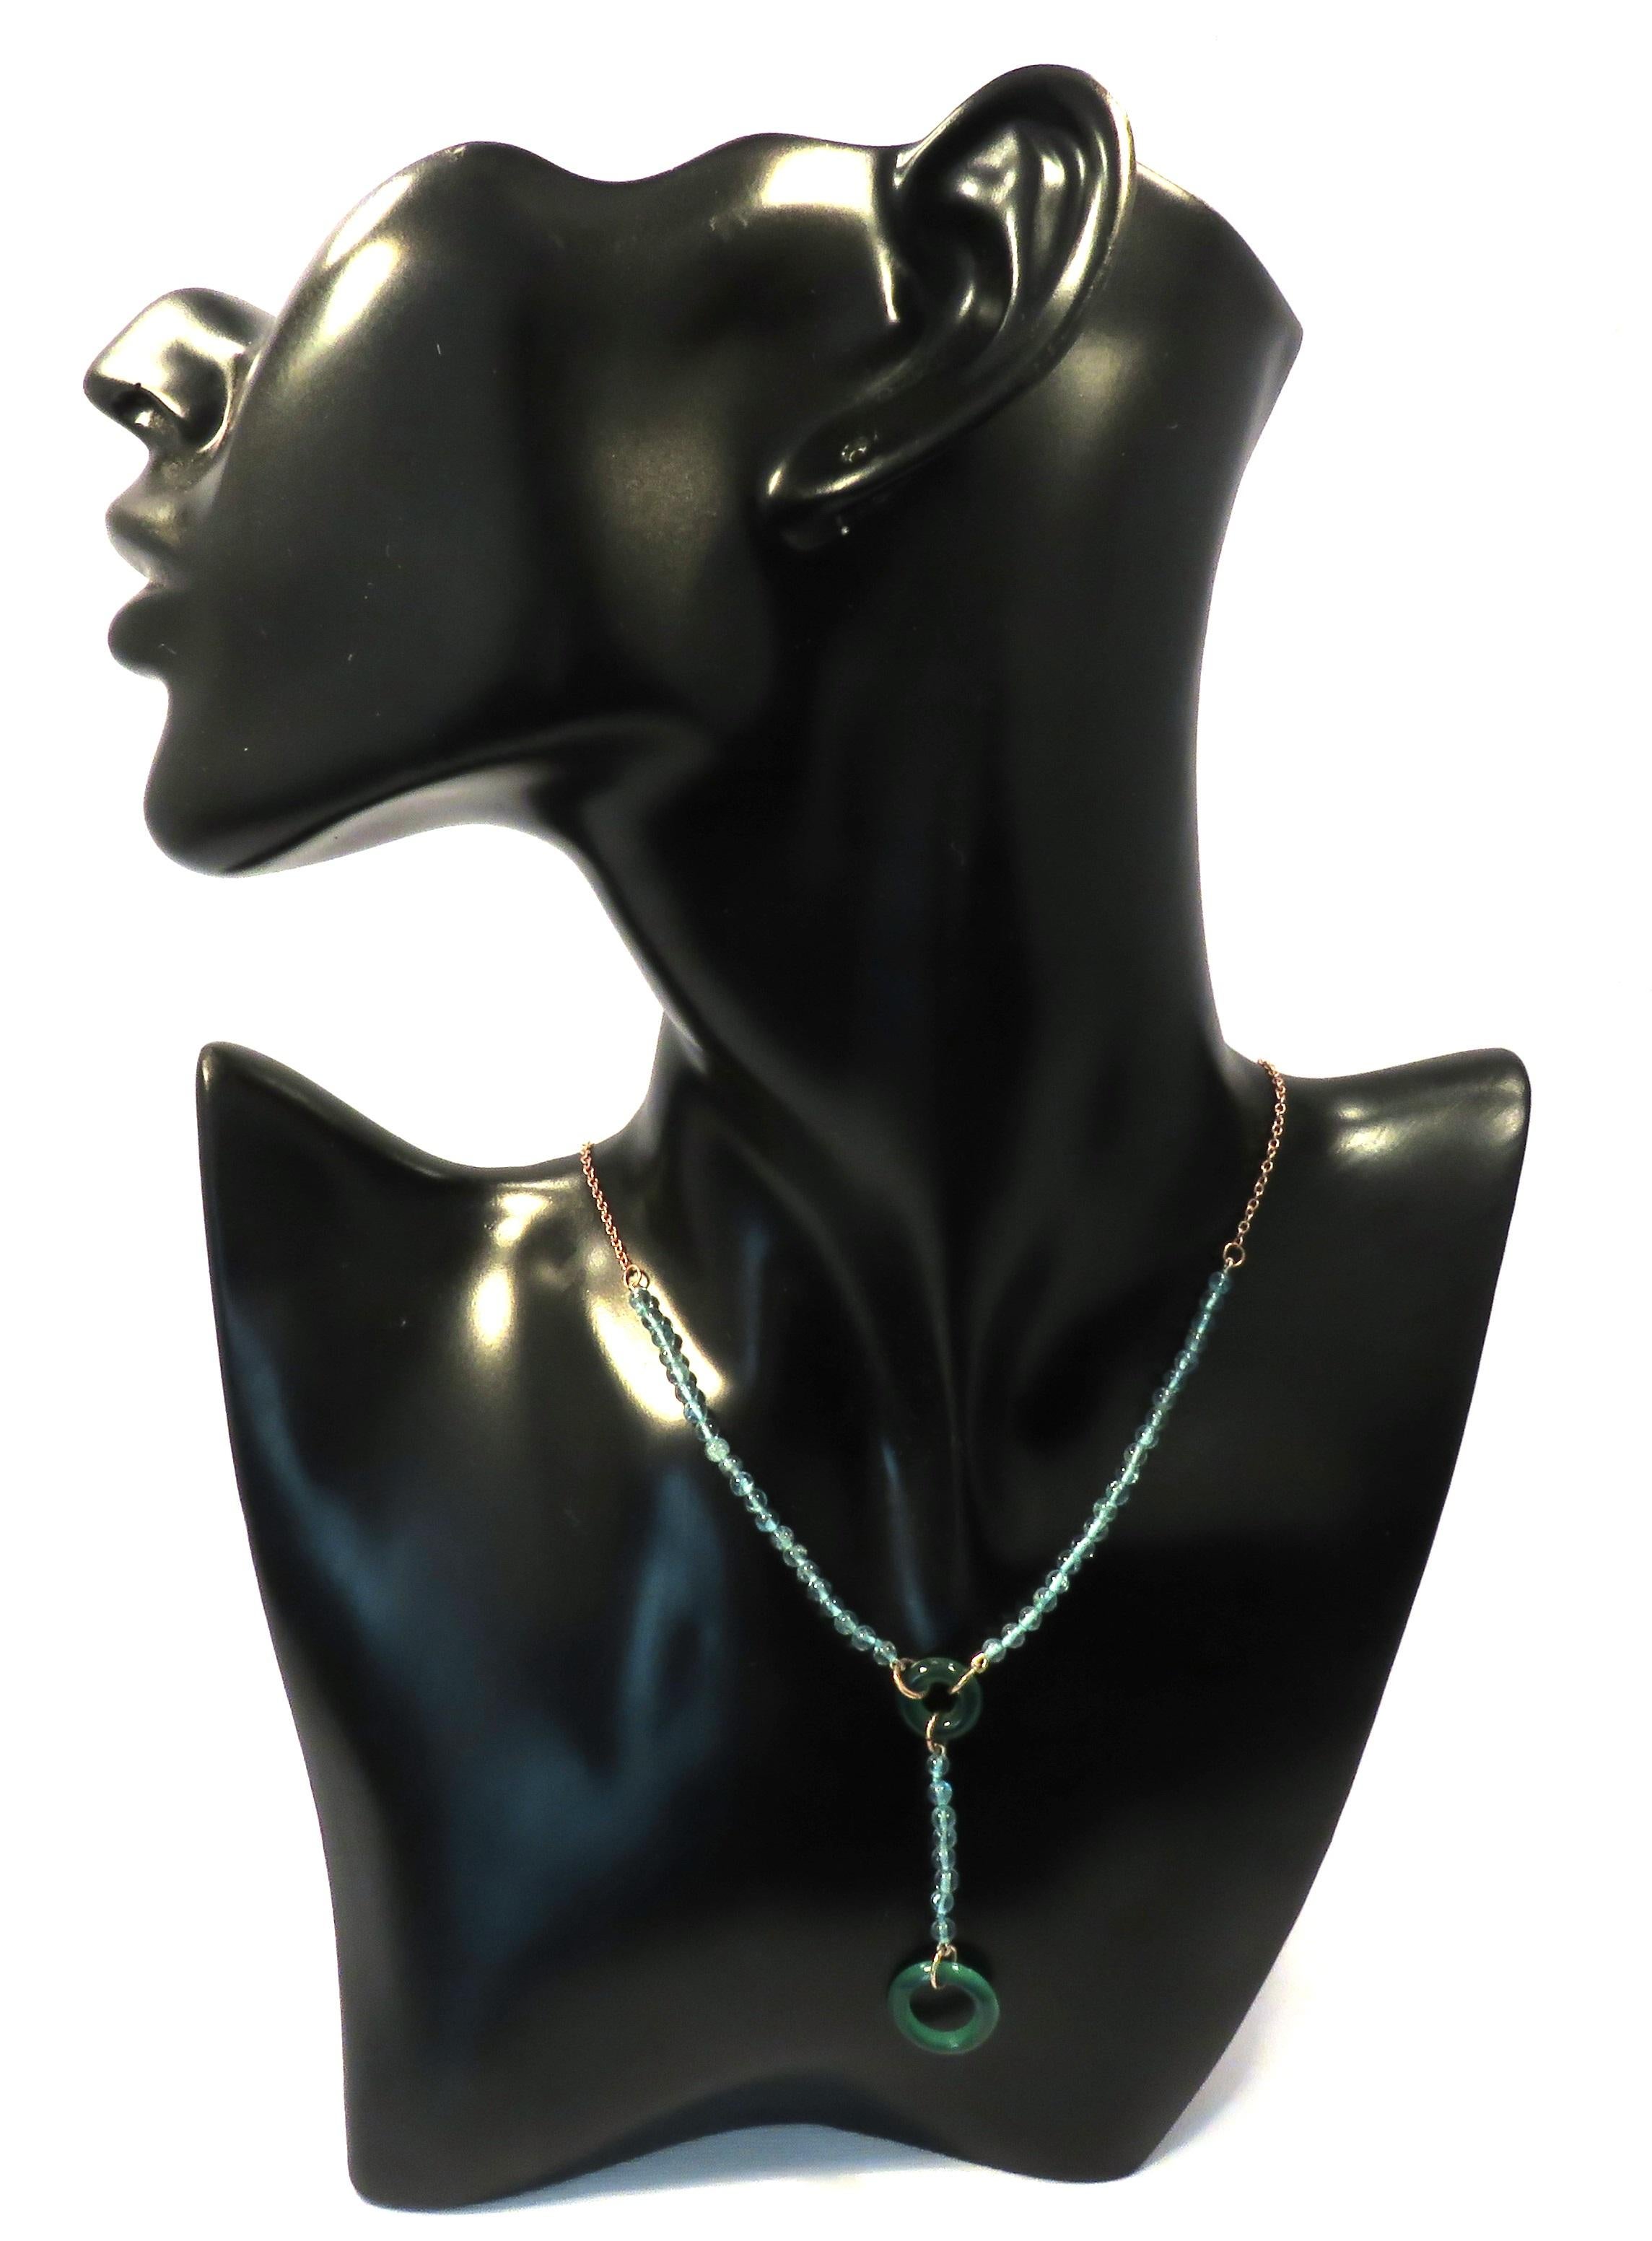 Beautiful necklace with light blue apatite and green agate crafted in 9 karat rose gold. The necklace length is adjustable from 380 mm to 410 mm / from 14.960 to 16.141 inches, it is possible to lengthen the necklace on customer's request. Handmade